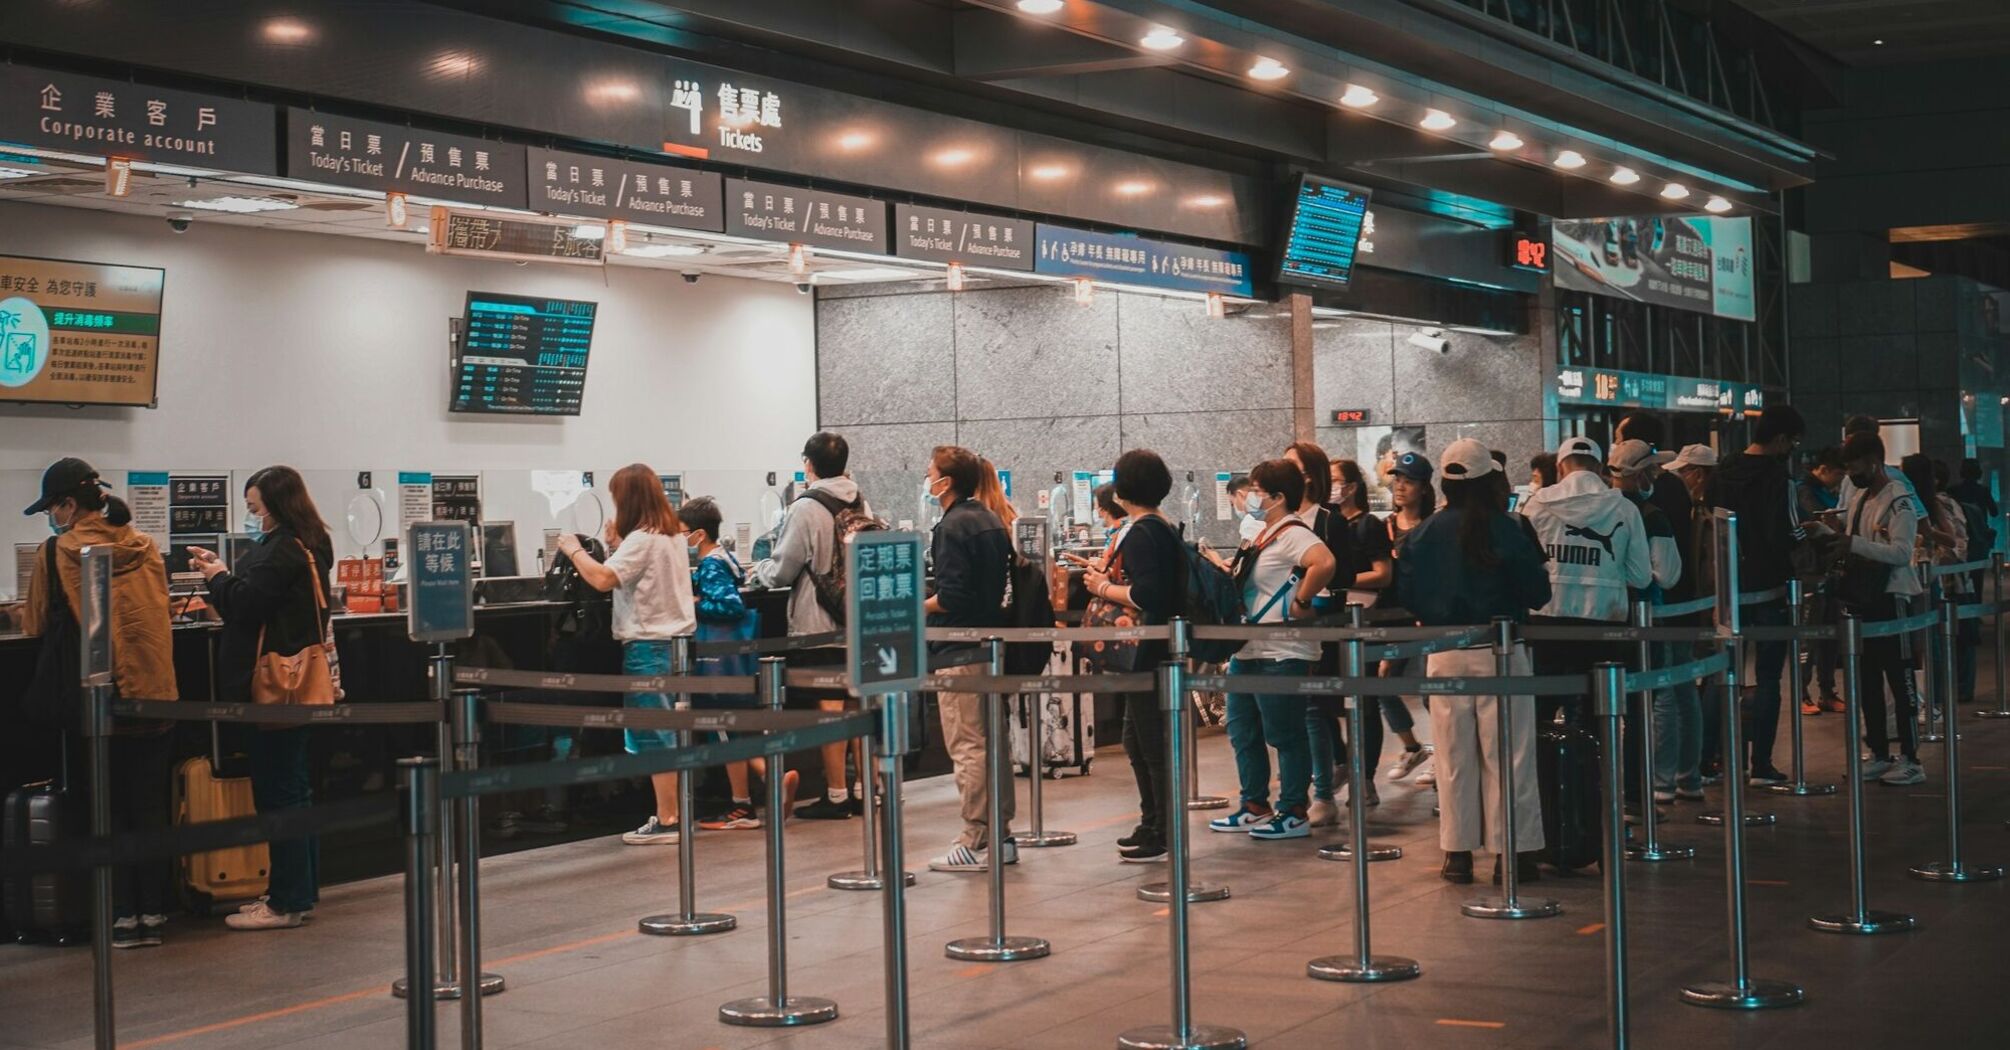 Travelers standing in line at a ticket counter with multiple service windows, some with longer lines than others 